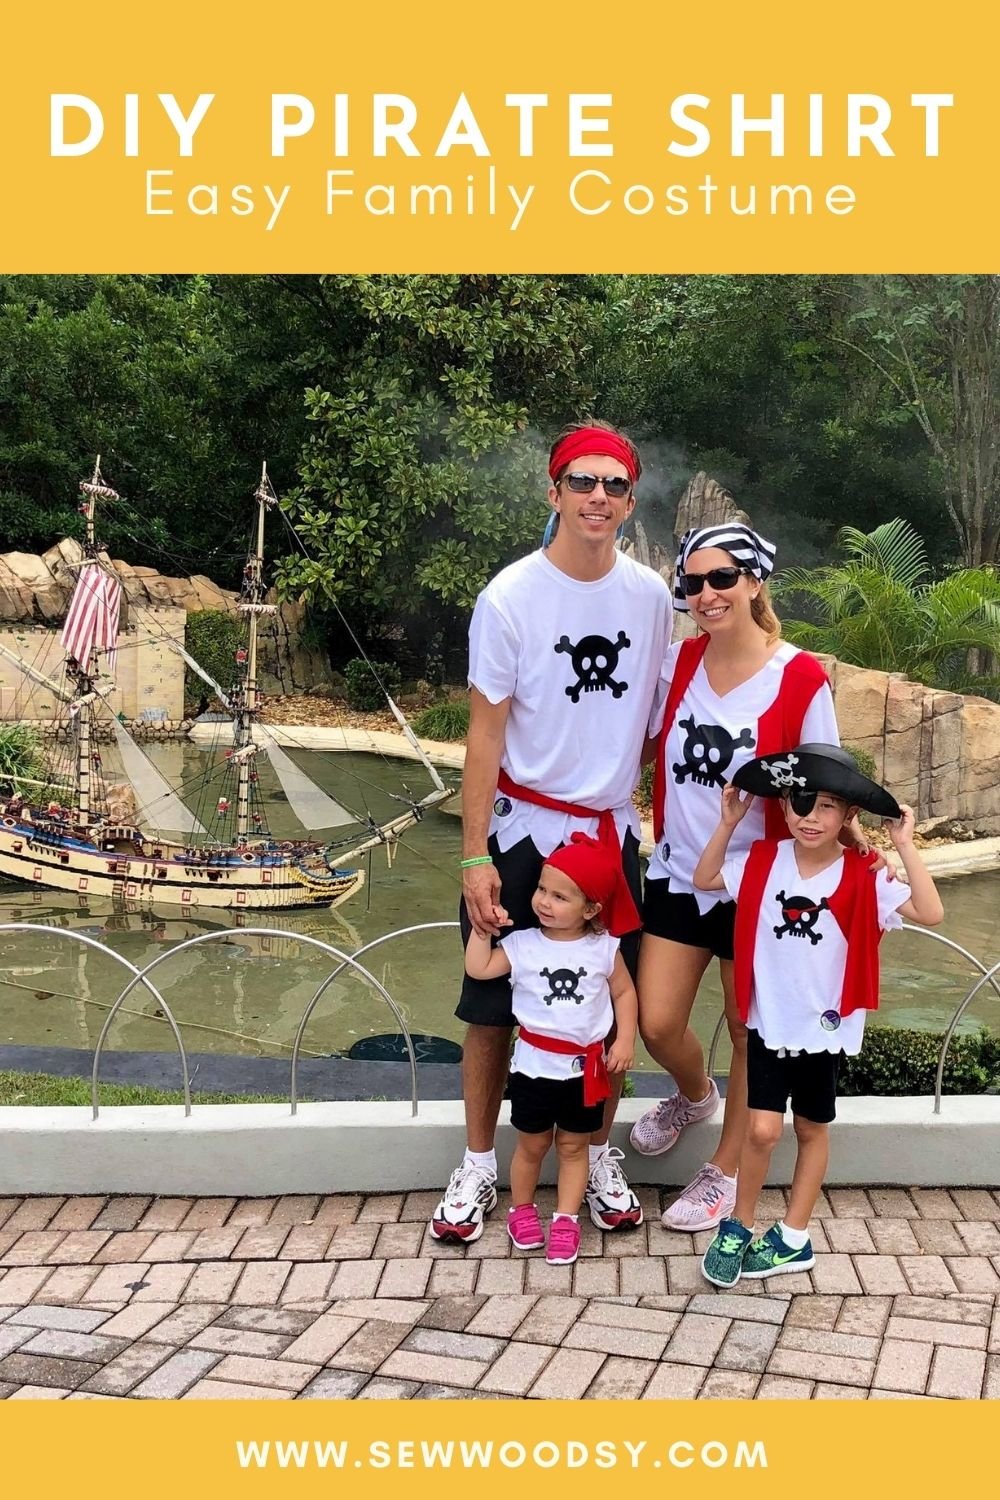 Family of four dressed in DIY Pirate Shirt costumes with text on image for Pinterest.